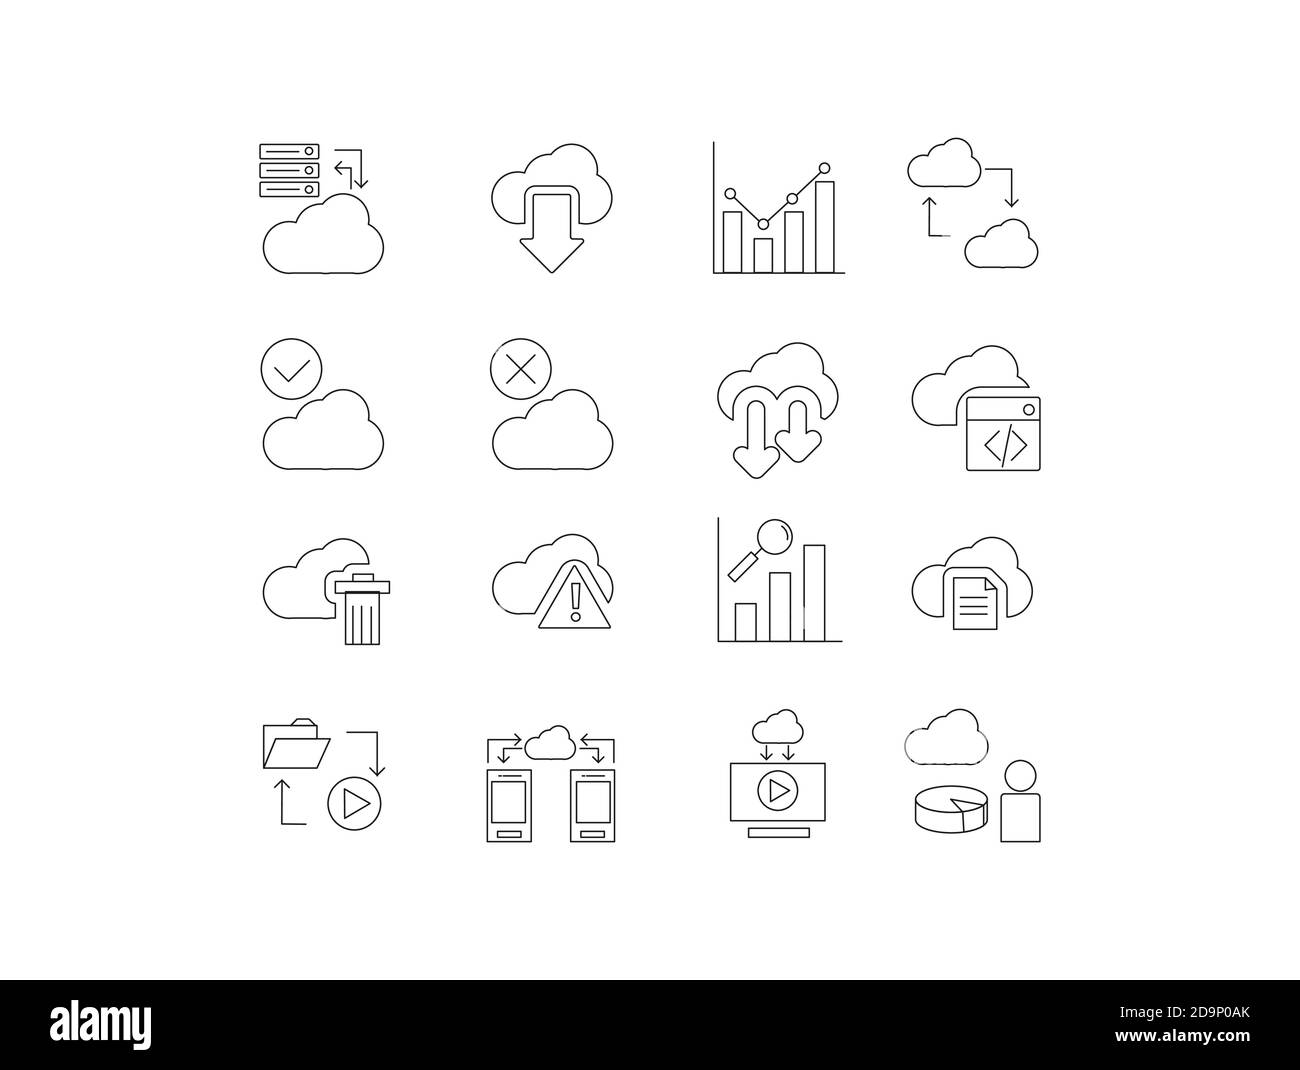 Cloud Computing Icon Set with All Subjects That Represent It Stock Vector